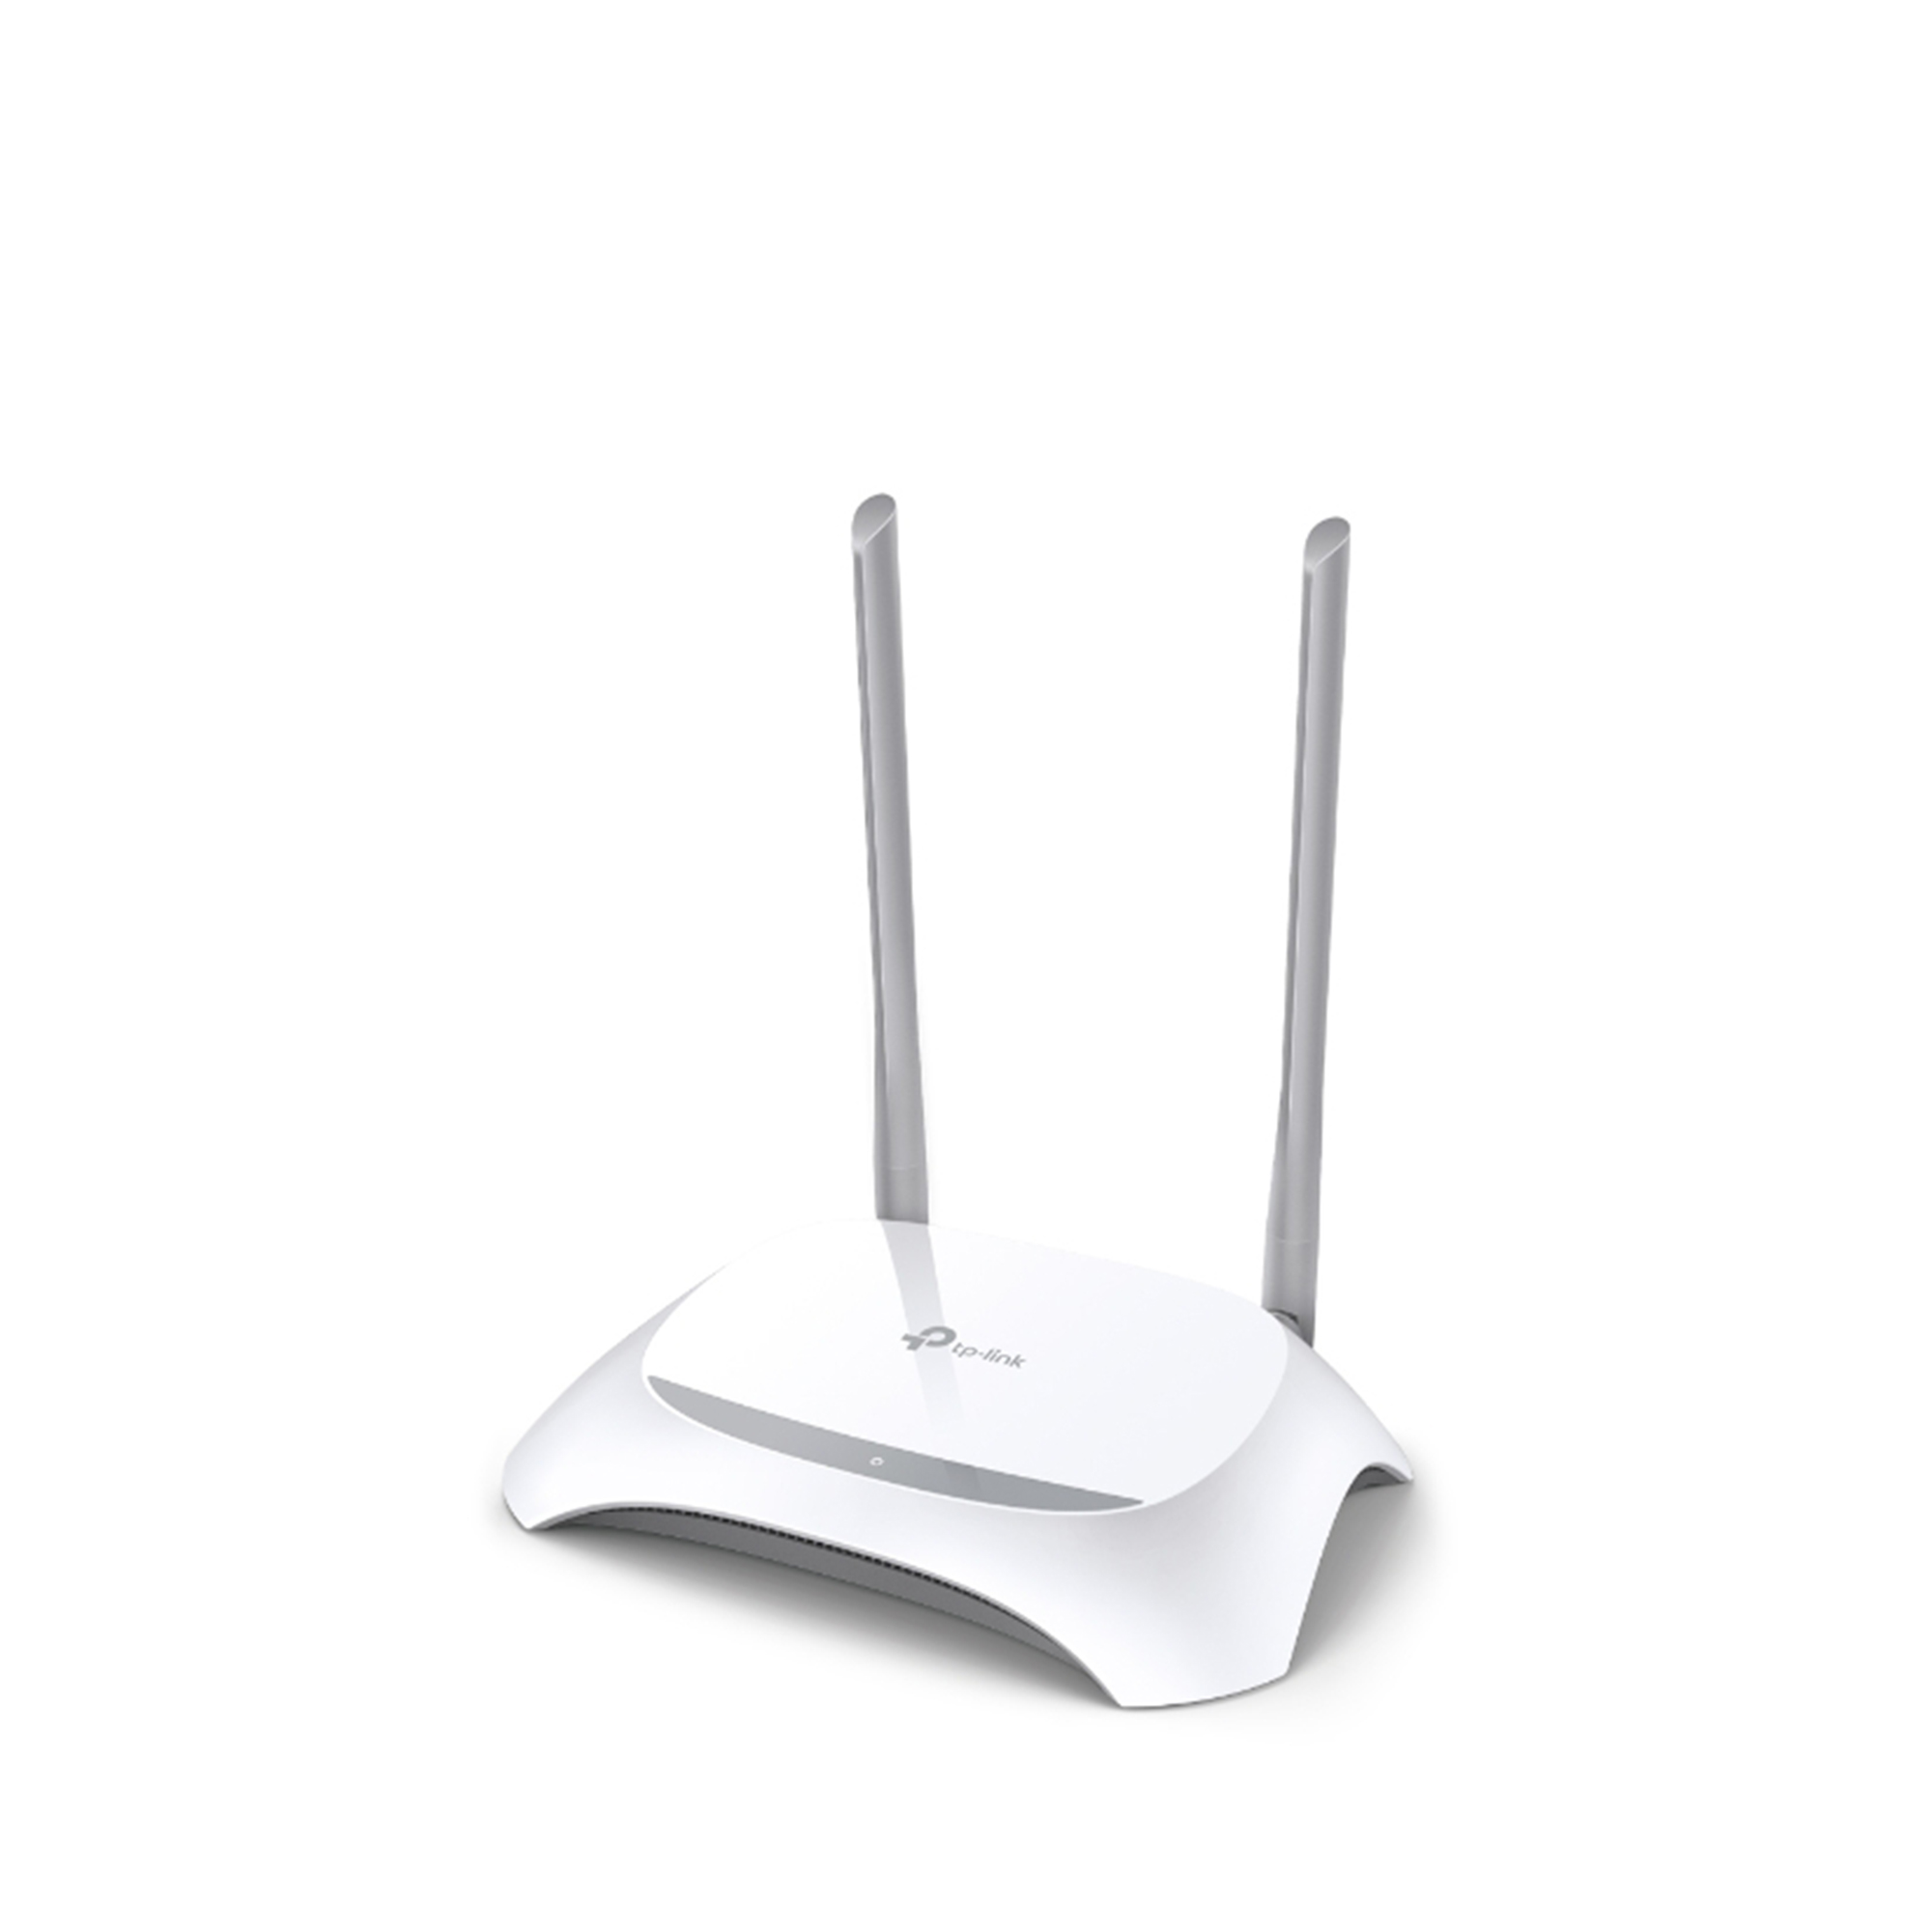 SALE] TP-Link Tl-WR840N 300MBPS Wireless N Speed Router - Accenthub